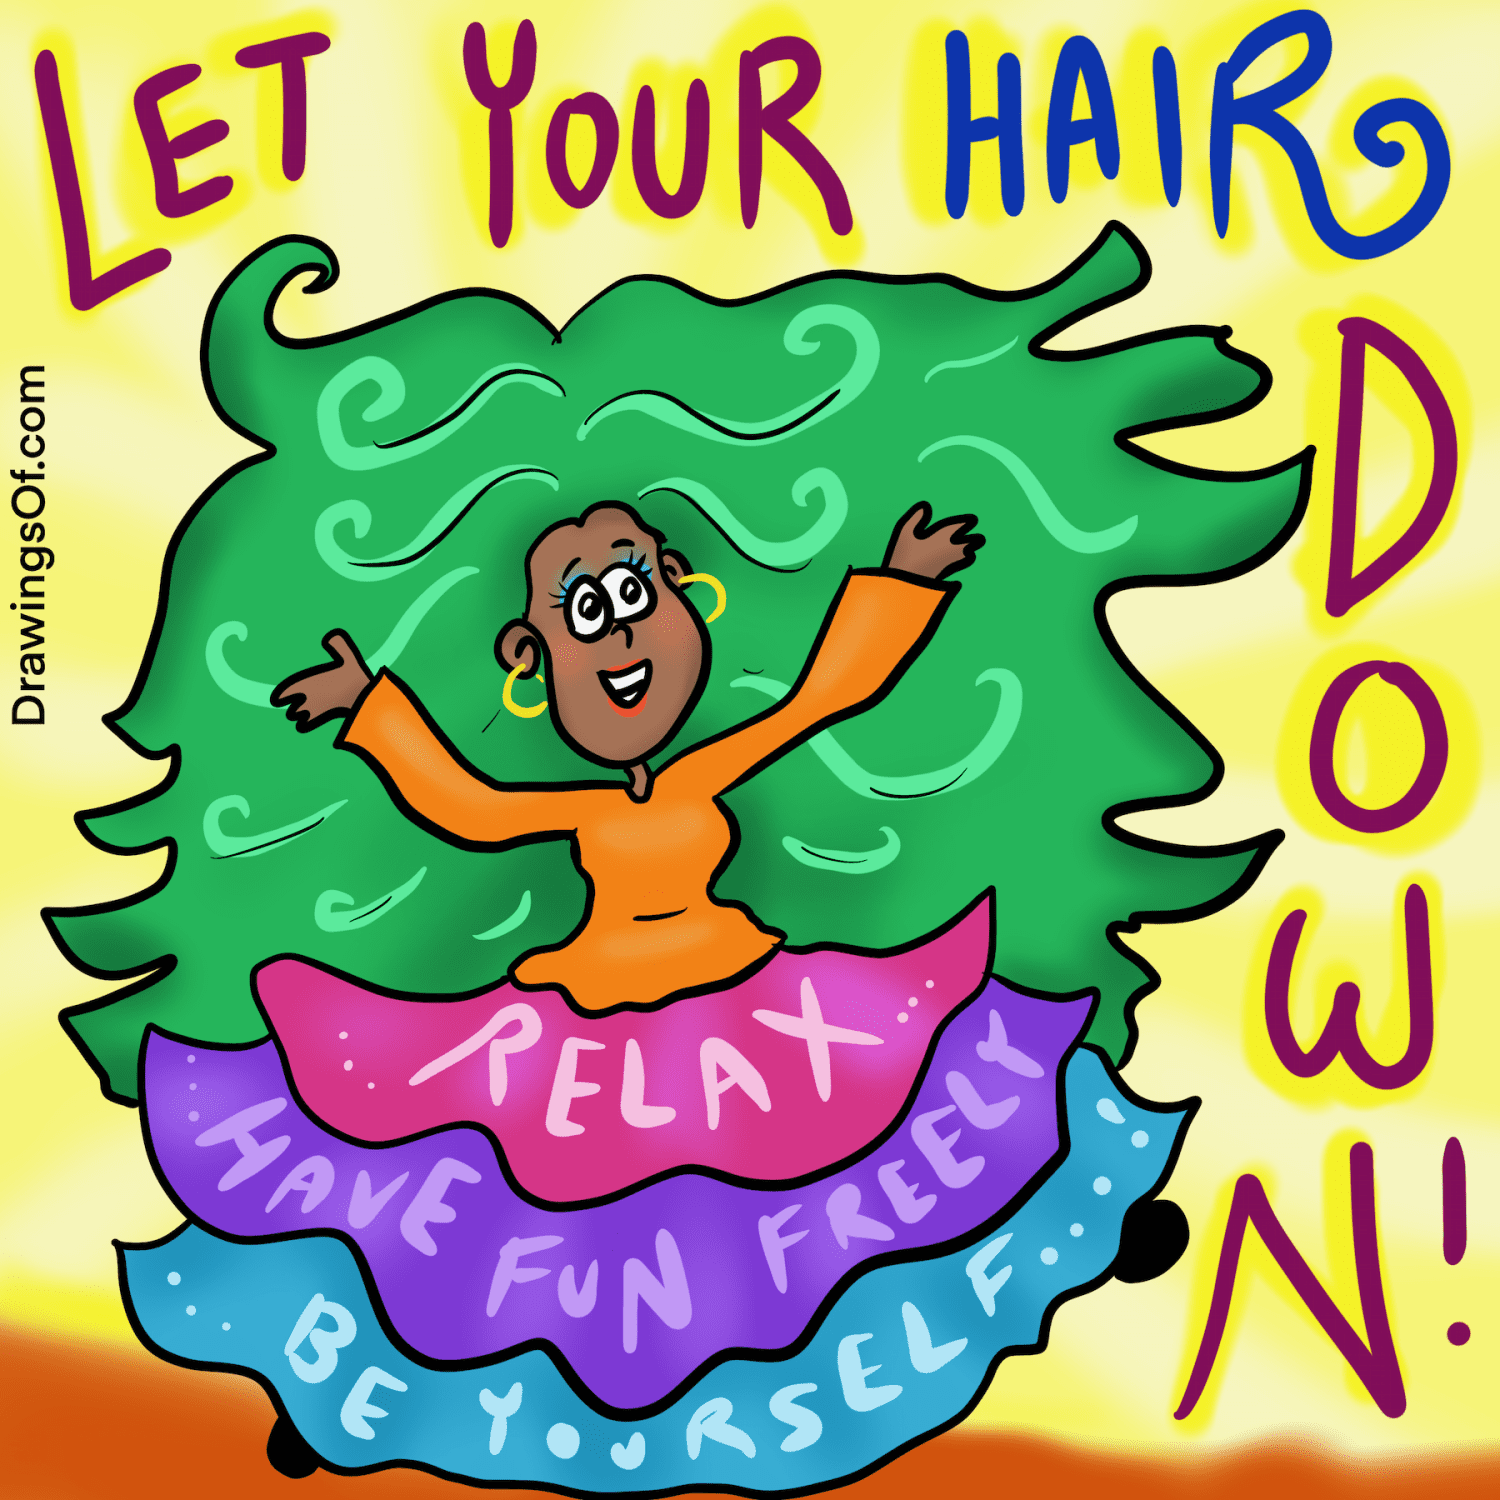 "Let your hair down" meaning, illustrated.